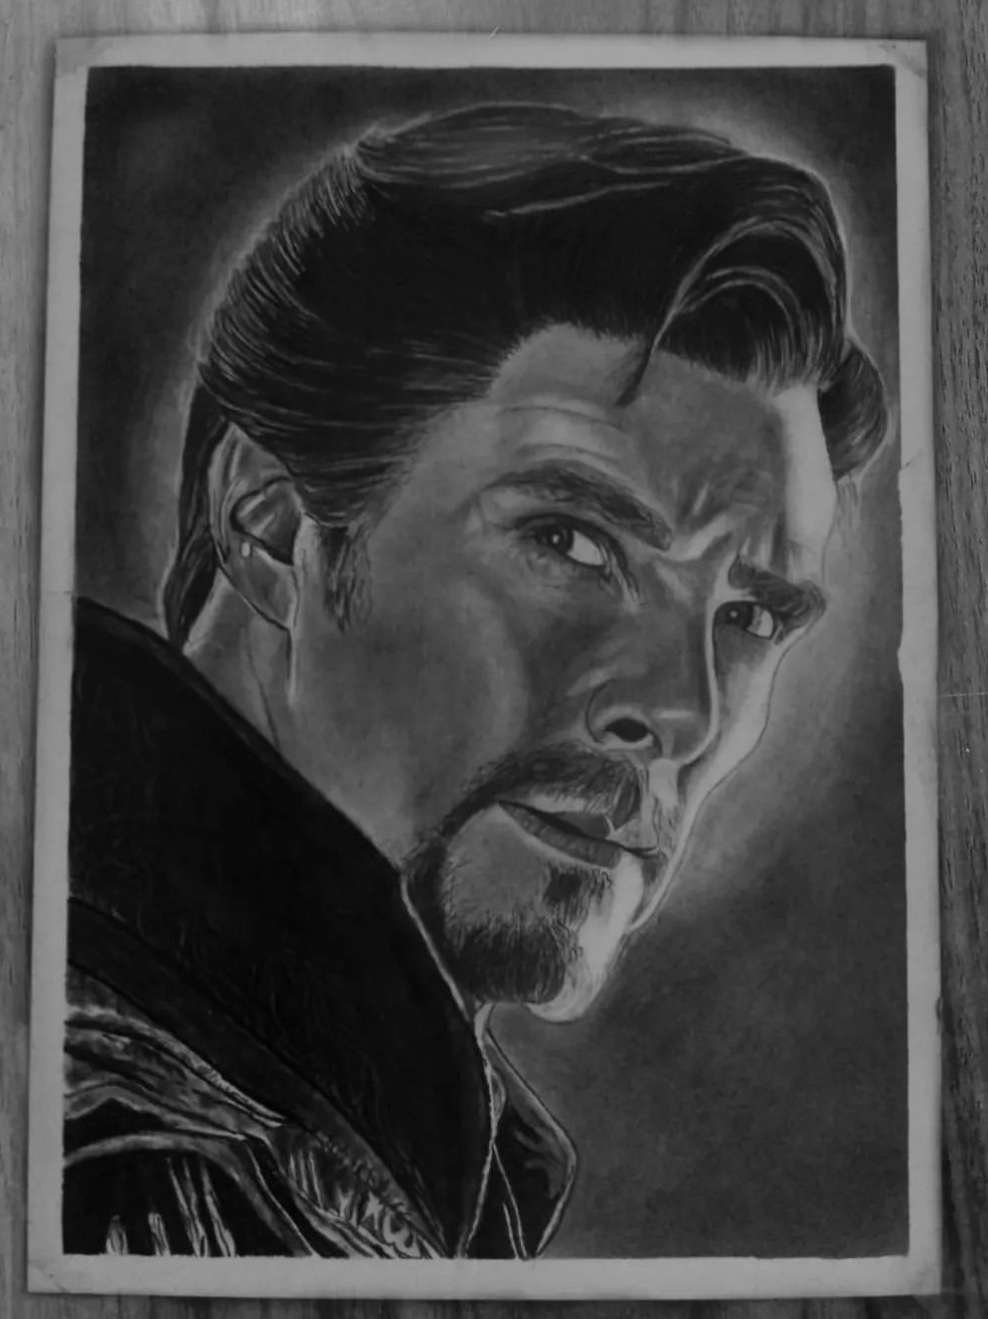 Doctor Strange Pencil Drawing | How To Draw Portrait with Shading - YouTube